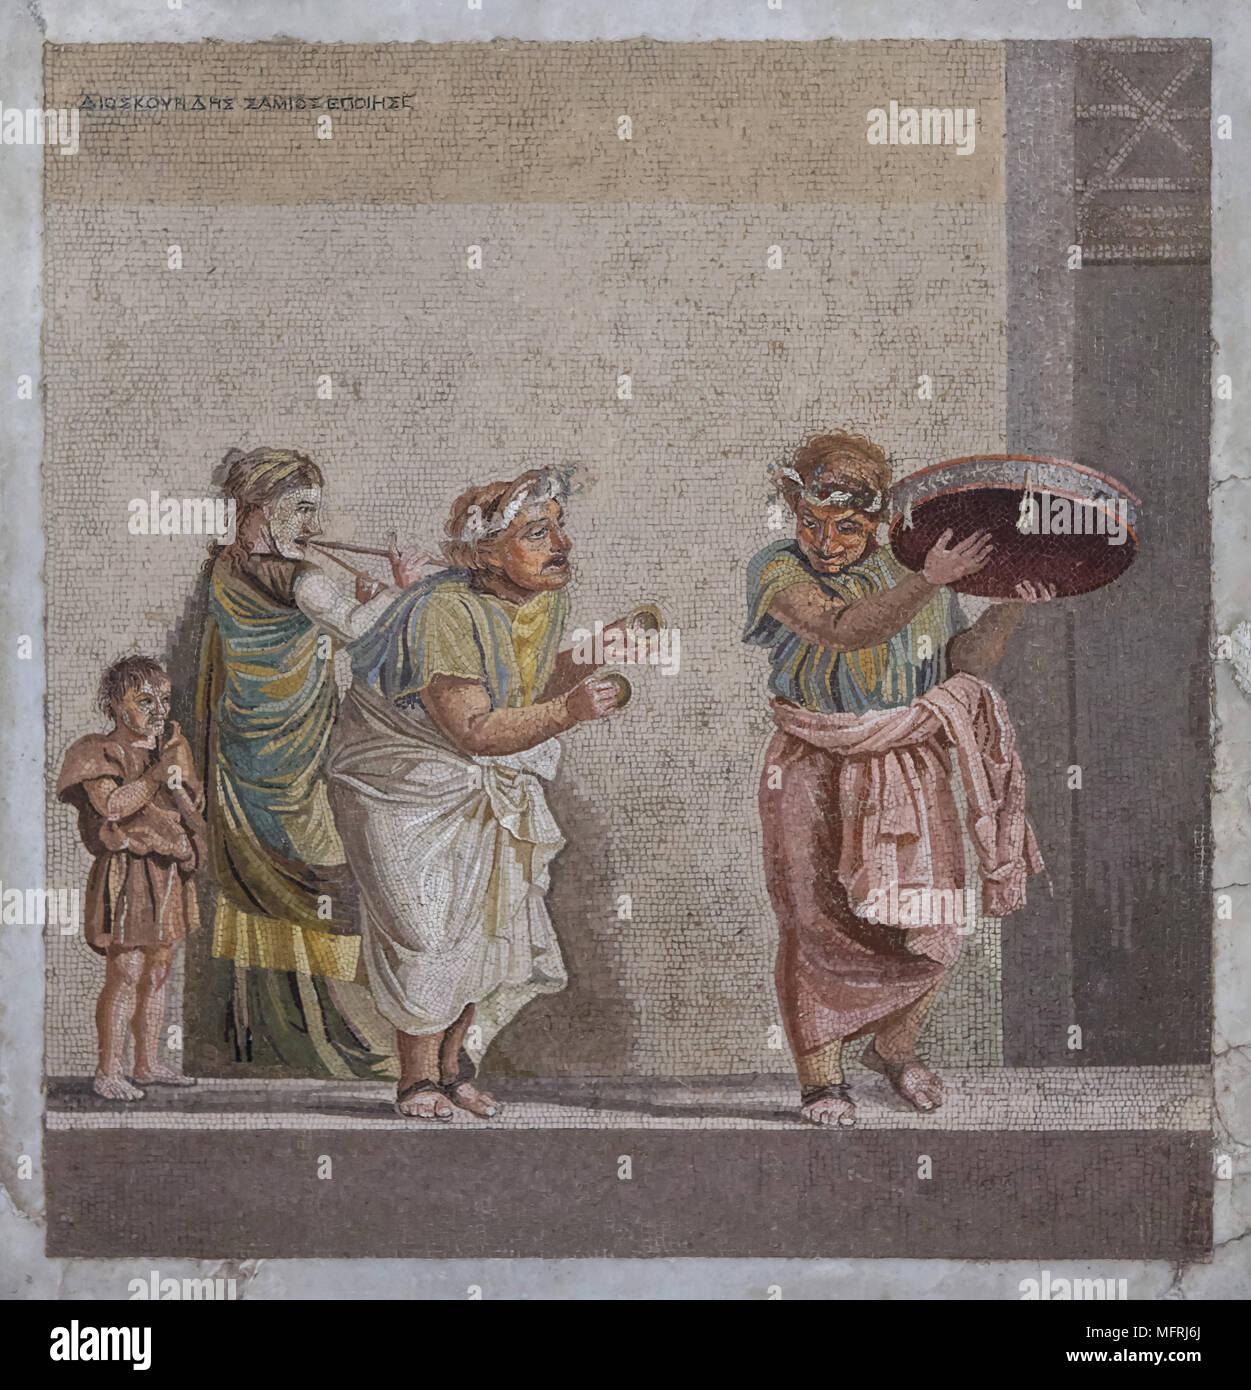 Comedy scene depicted in the Roman mosaic from Villa de Cicero (Villa of Cicero) in Pompeii, now on display in the National Archaeological Museum (Museo Archeologico Nazionale di Napoli) in Naples, Campania, Italy. Street musicians are depicted playing musical instruments often connected with the cult of Cybele: tambourine, small cymbals and double flute (tibia). The mosaic depicts an episode from a comedy, since the figures are wearing theatrical masks.  Signature on the top: signed by Dioskourides of Samos. Stock Photo